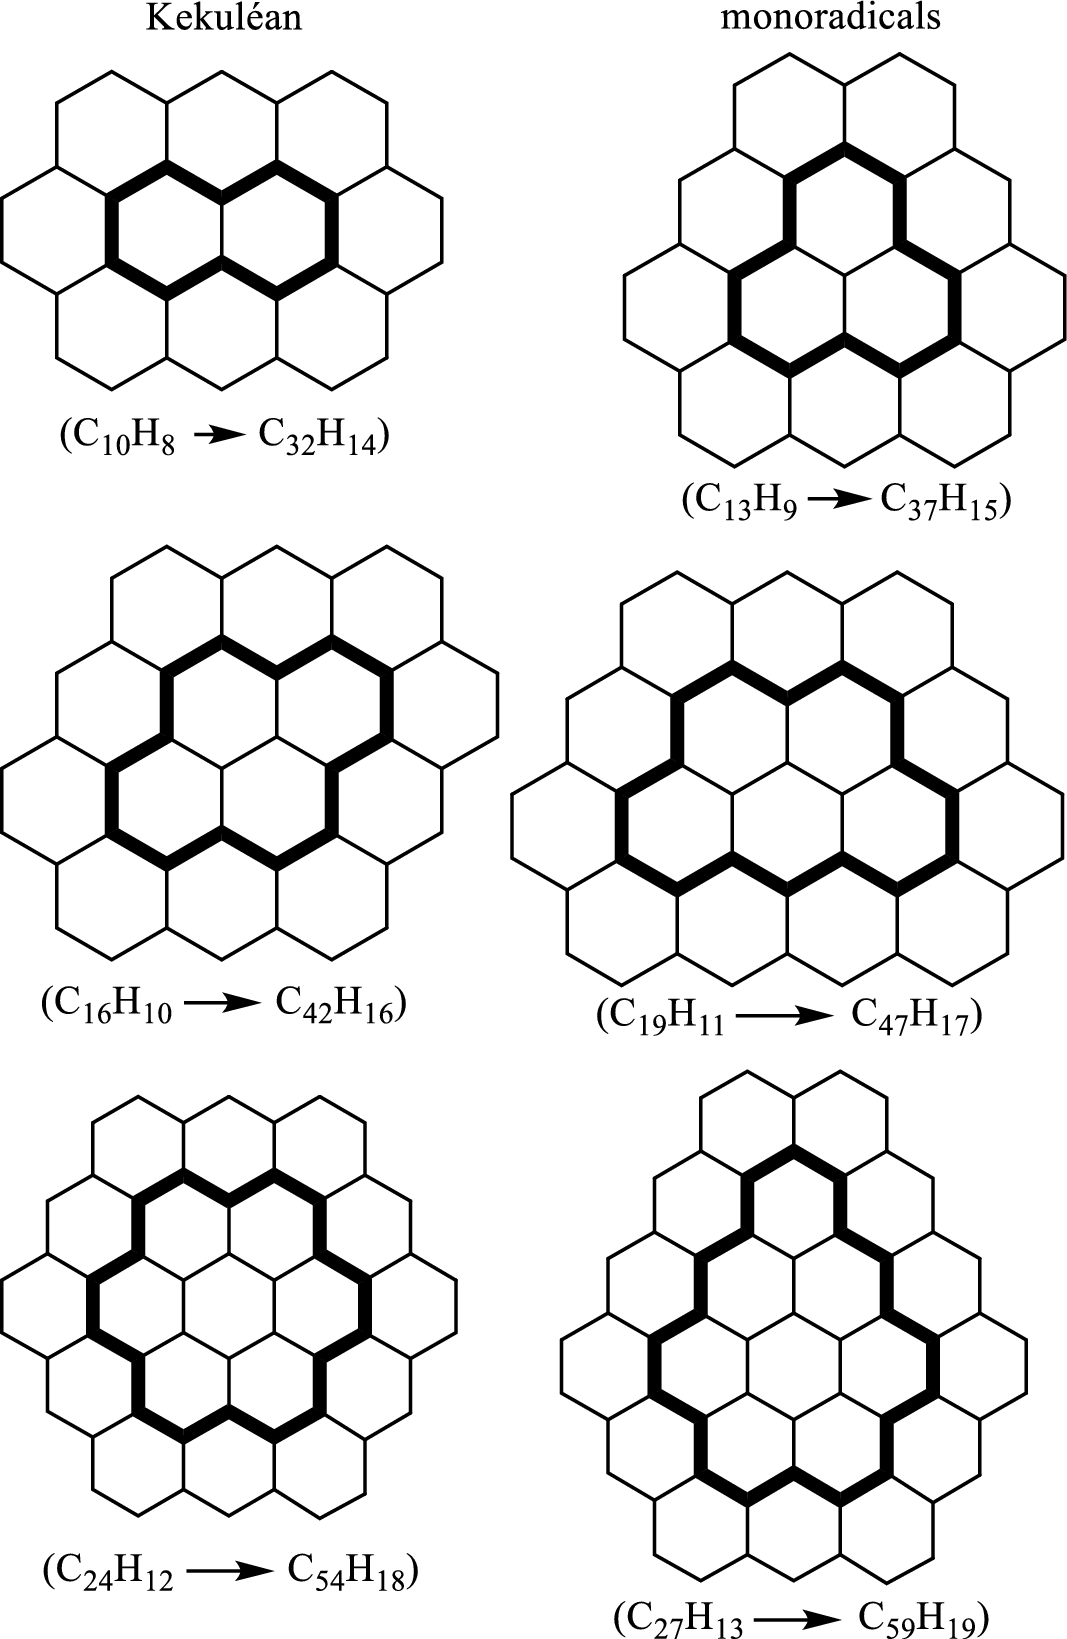 Isomer number patterns in aromatic hydrocarbon chemistry: the numbers speak for themselves